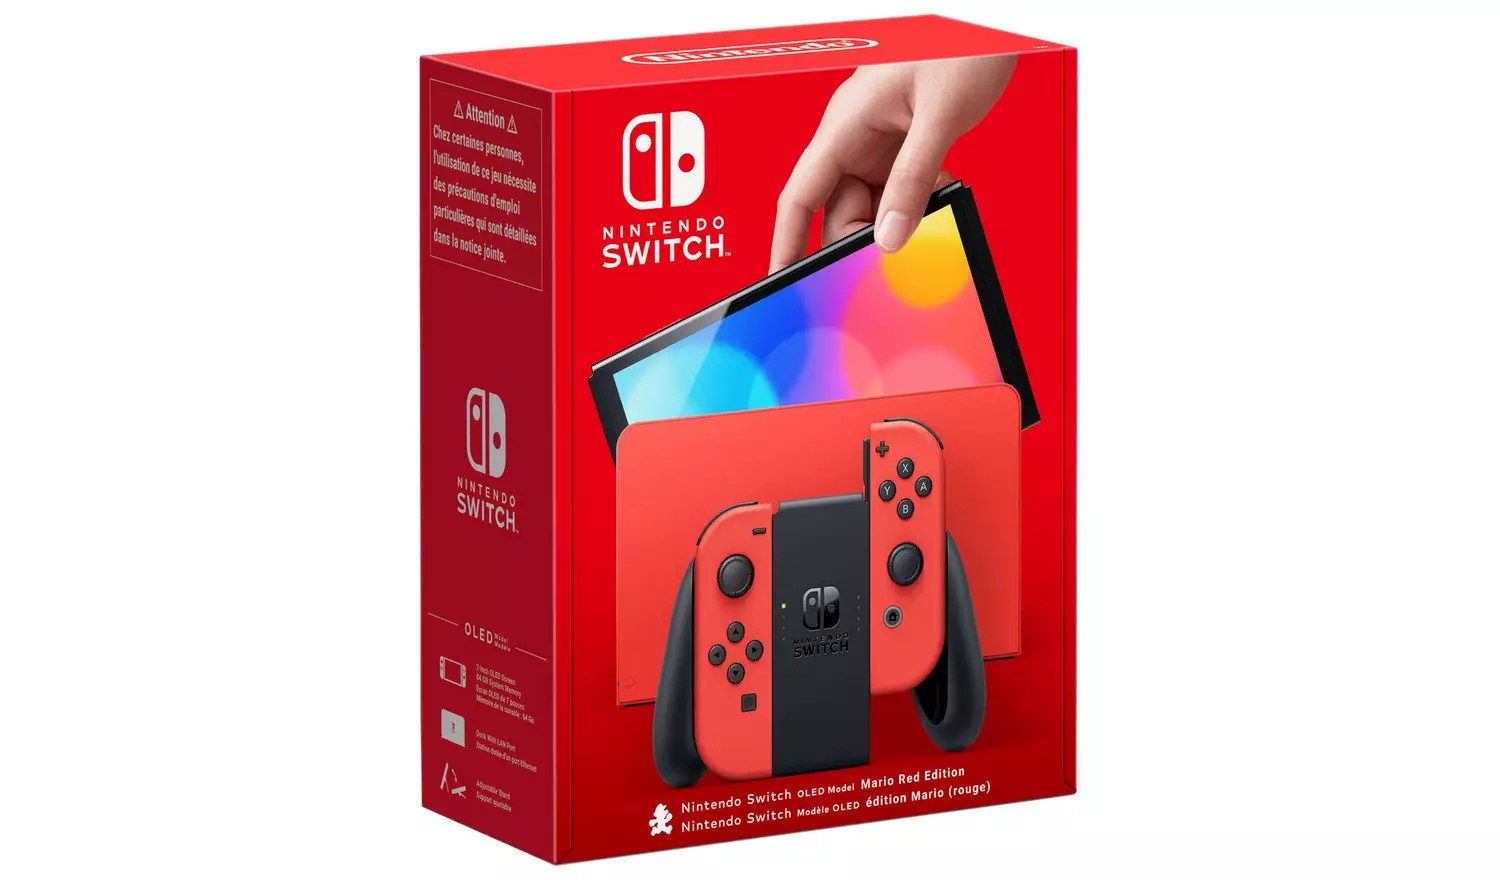 Get a free game with this Nintendo Switch OLED